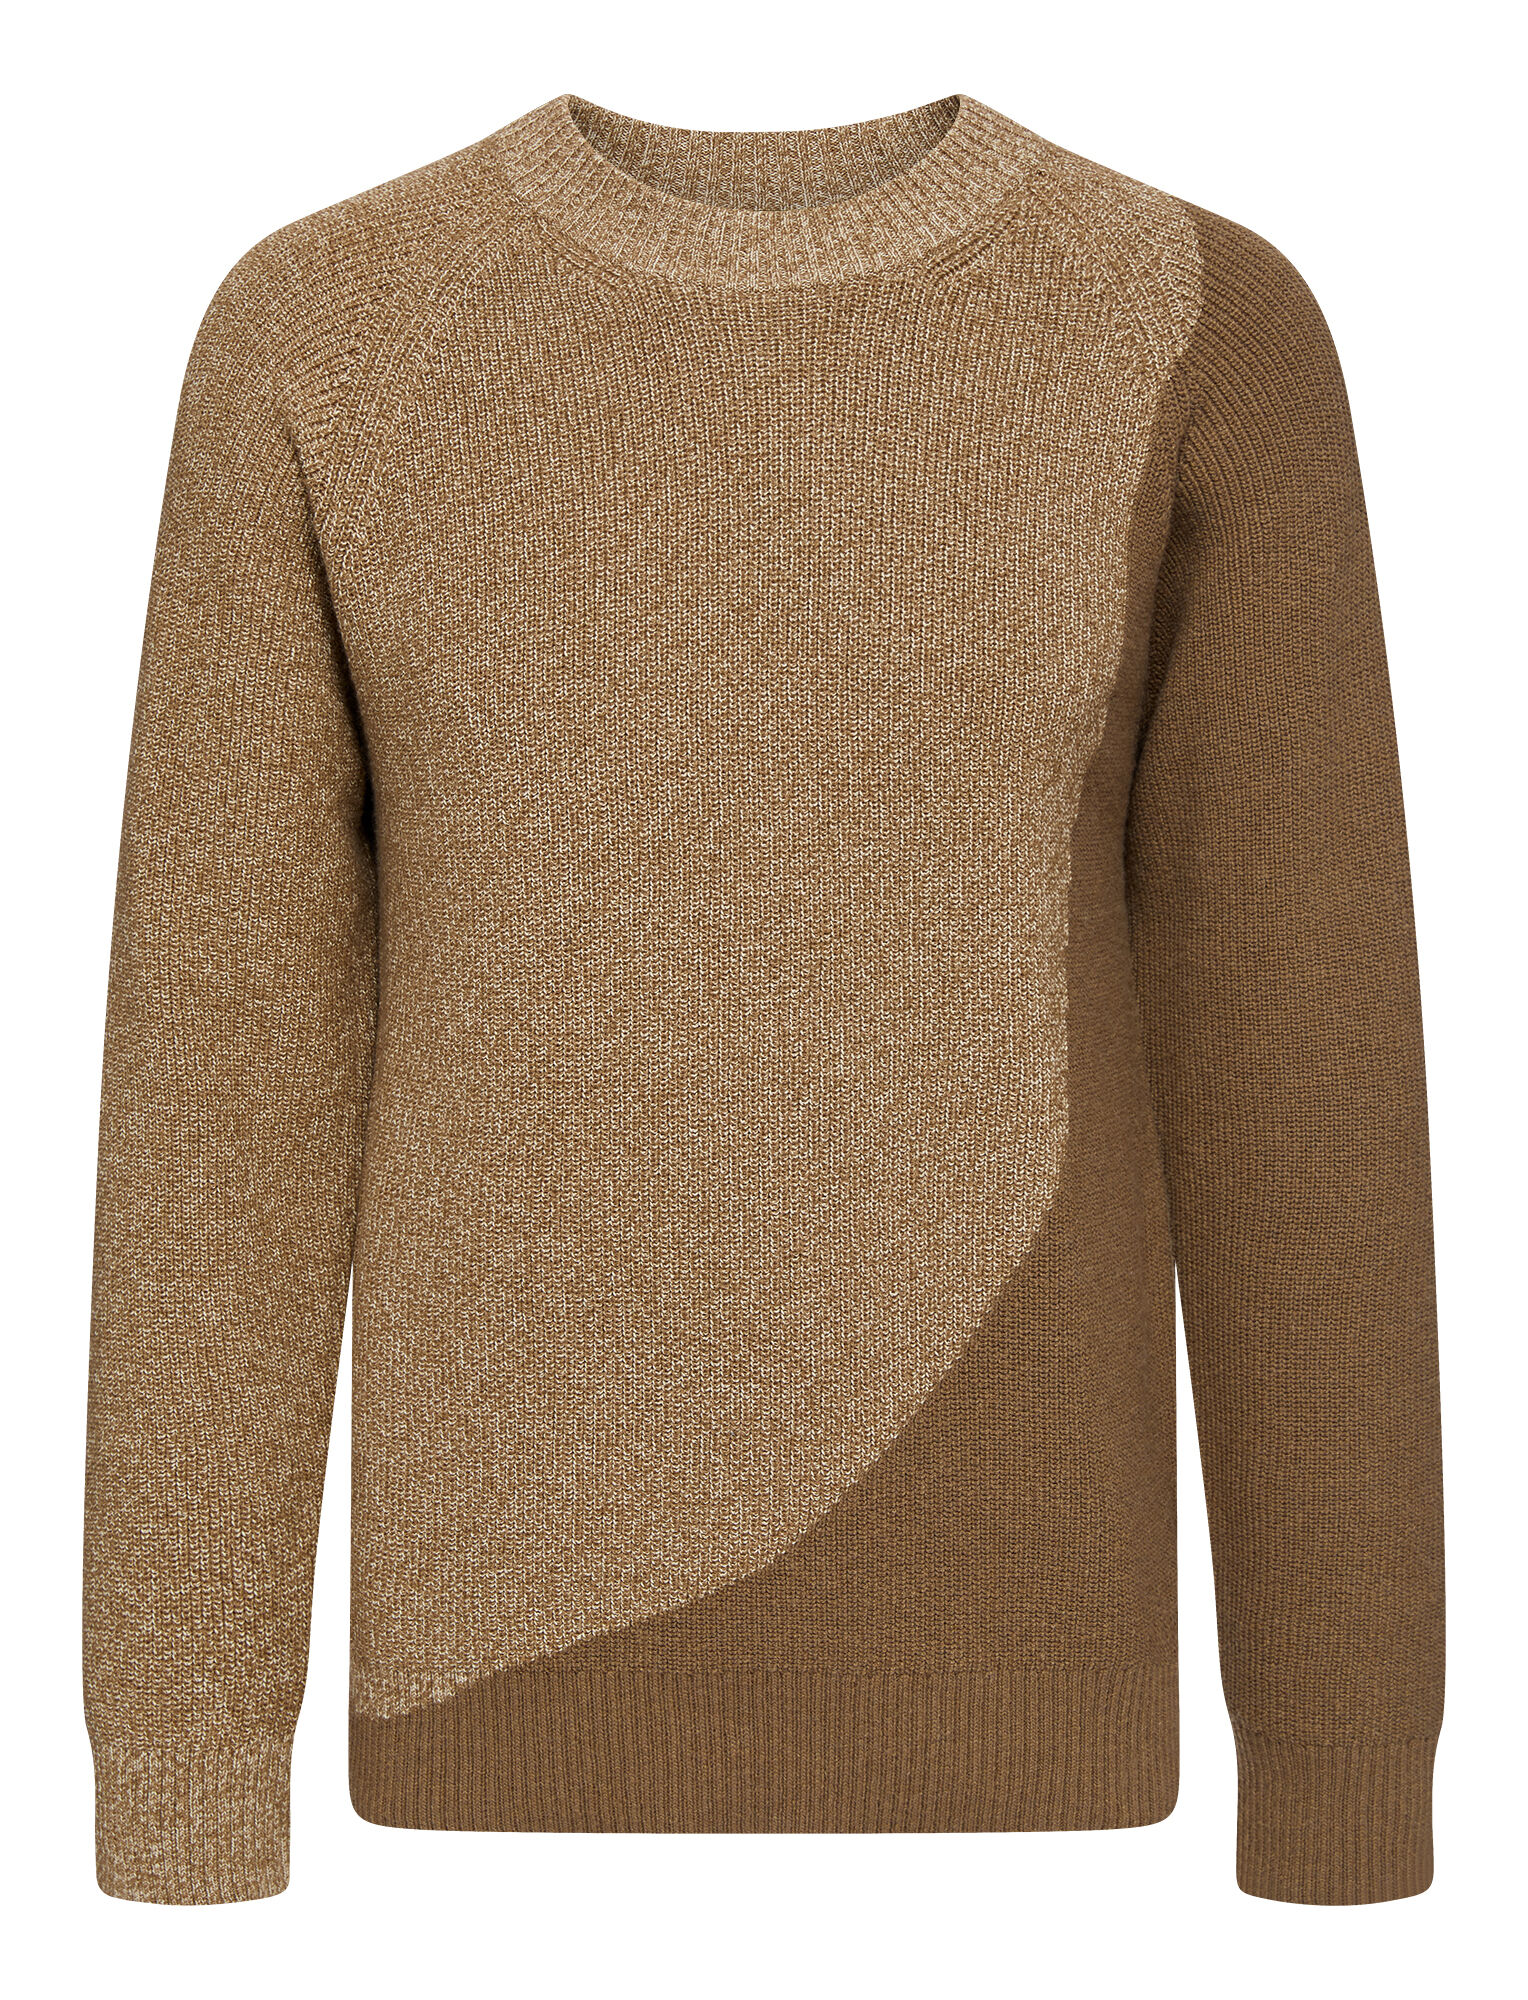 Joseph, Twisted Cotton Cashmere Jumper, in Taupe